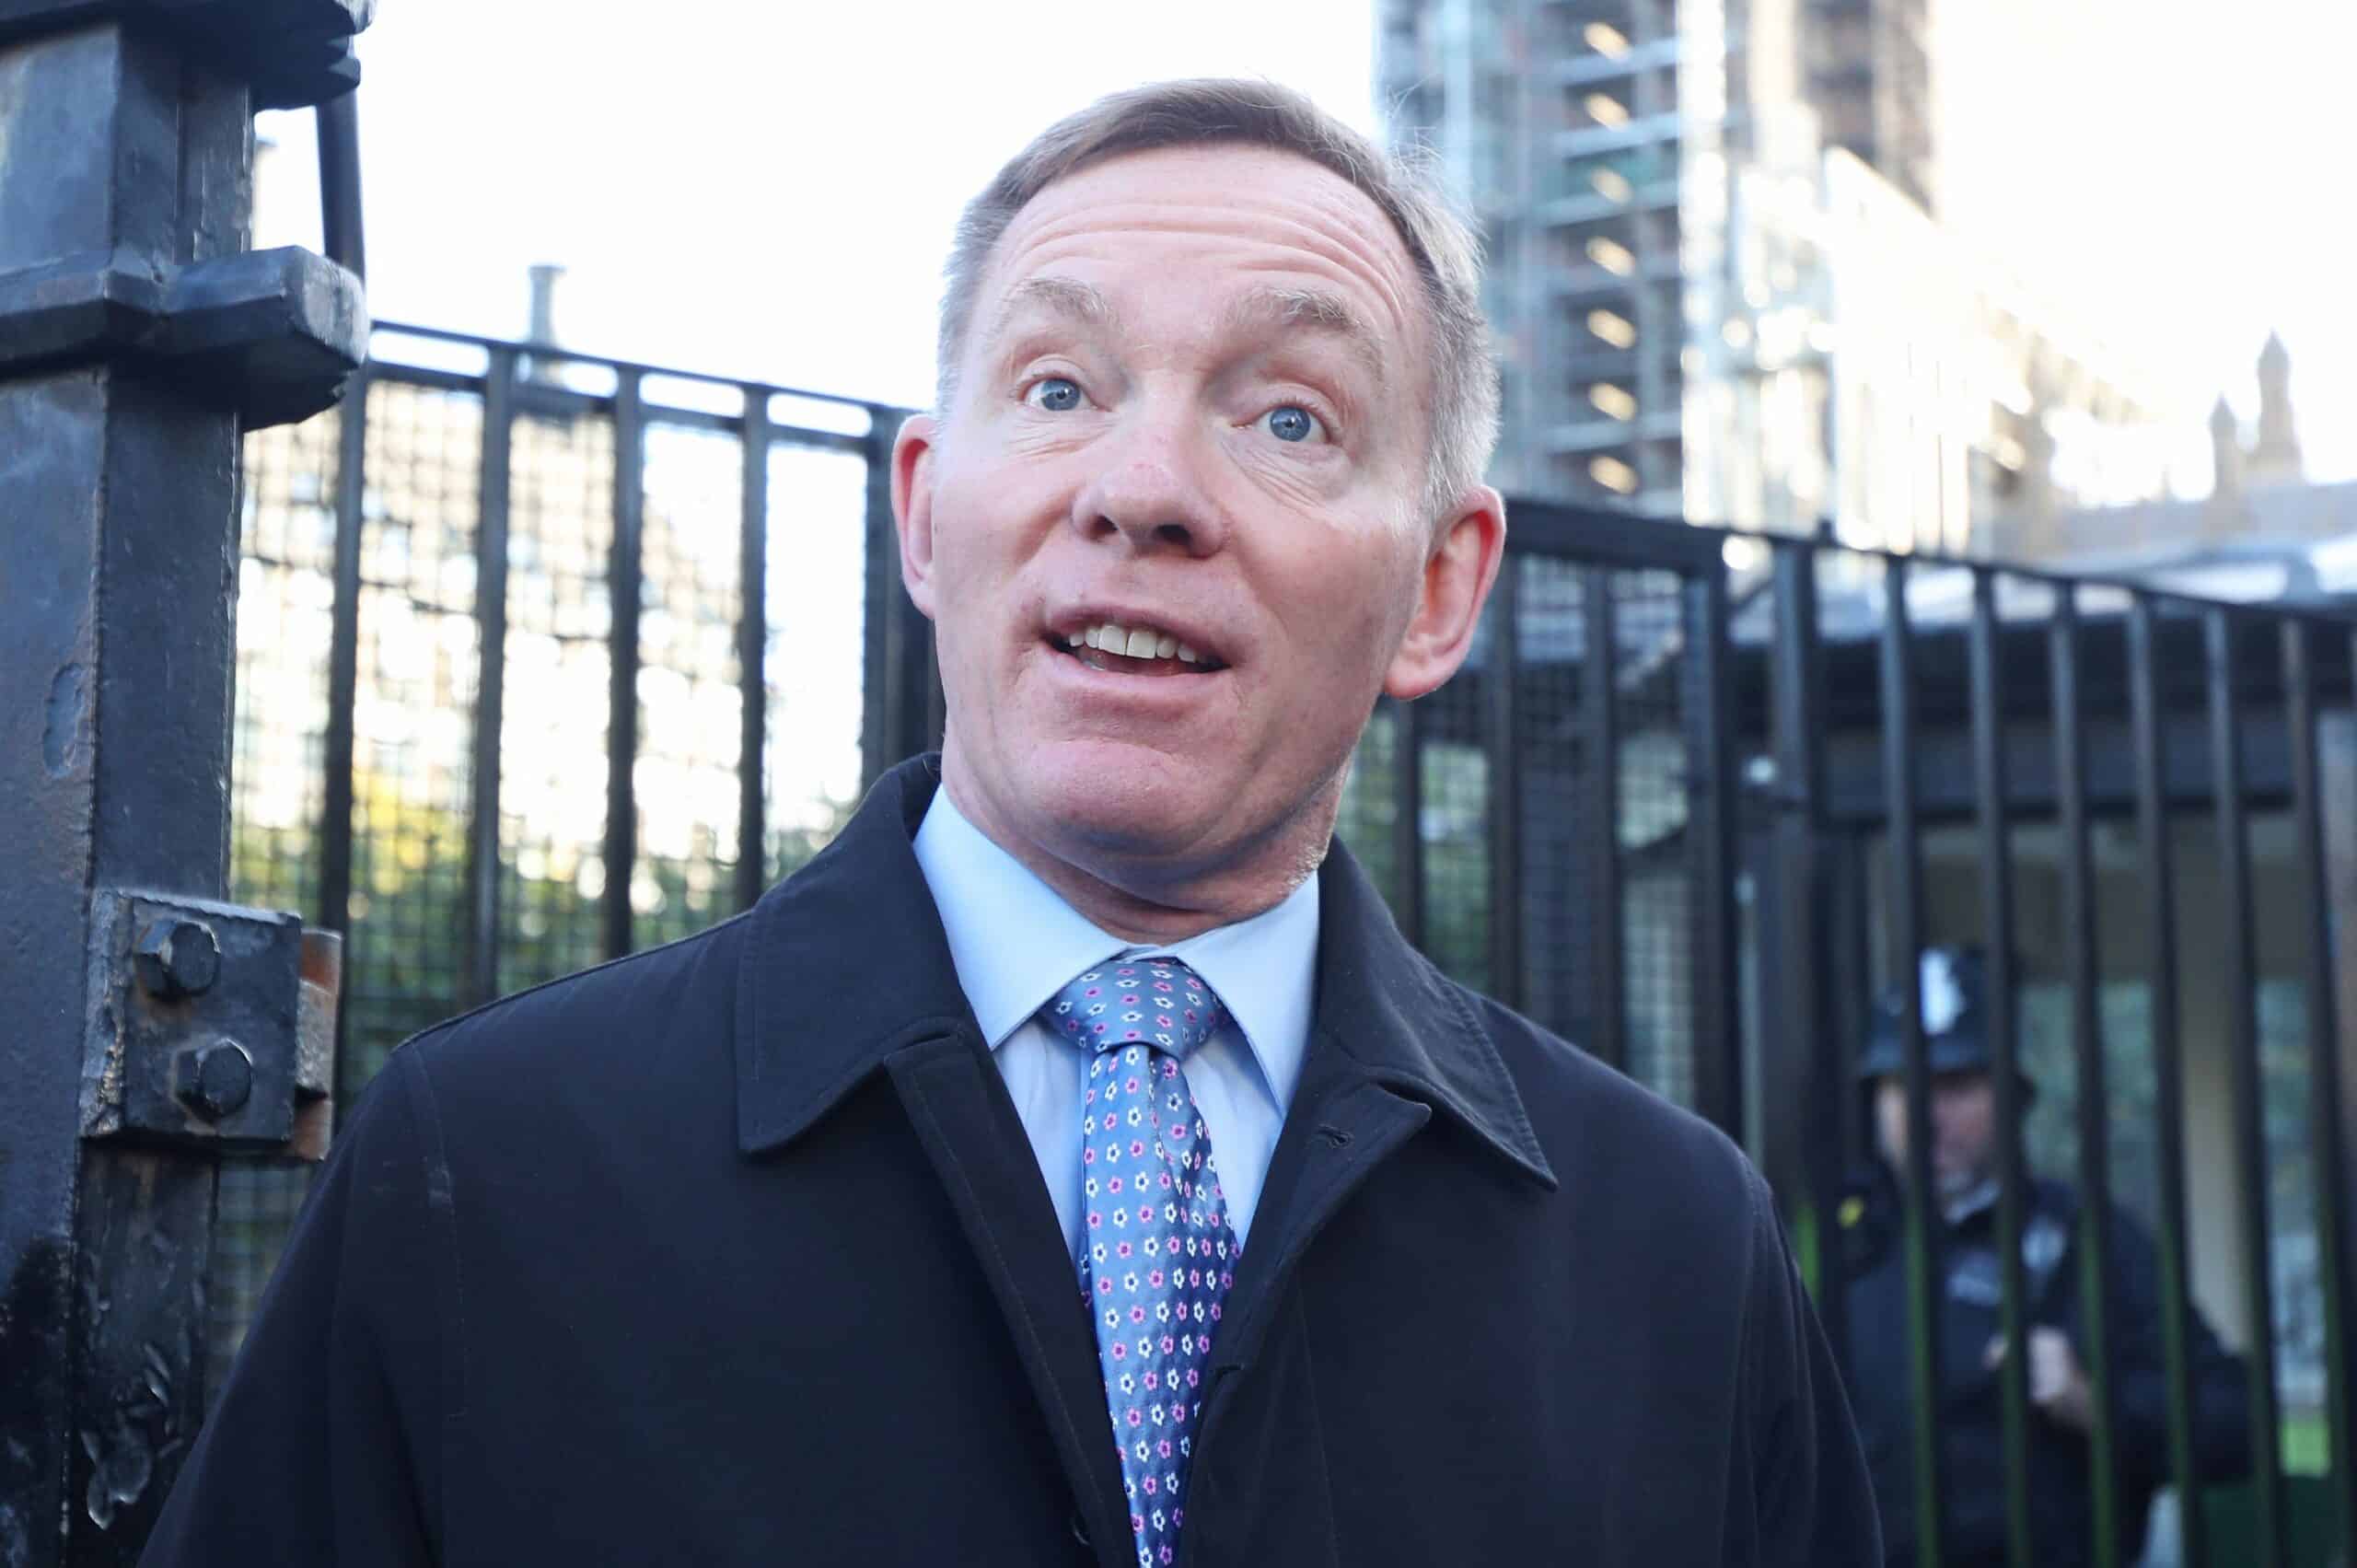 Labour is not scaling back £28bn green investment plan says Chris Bryant